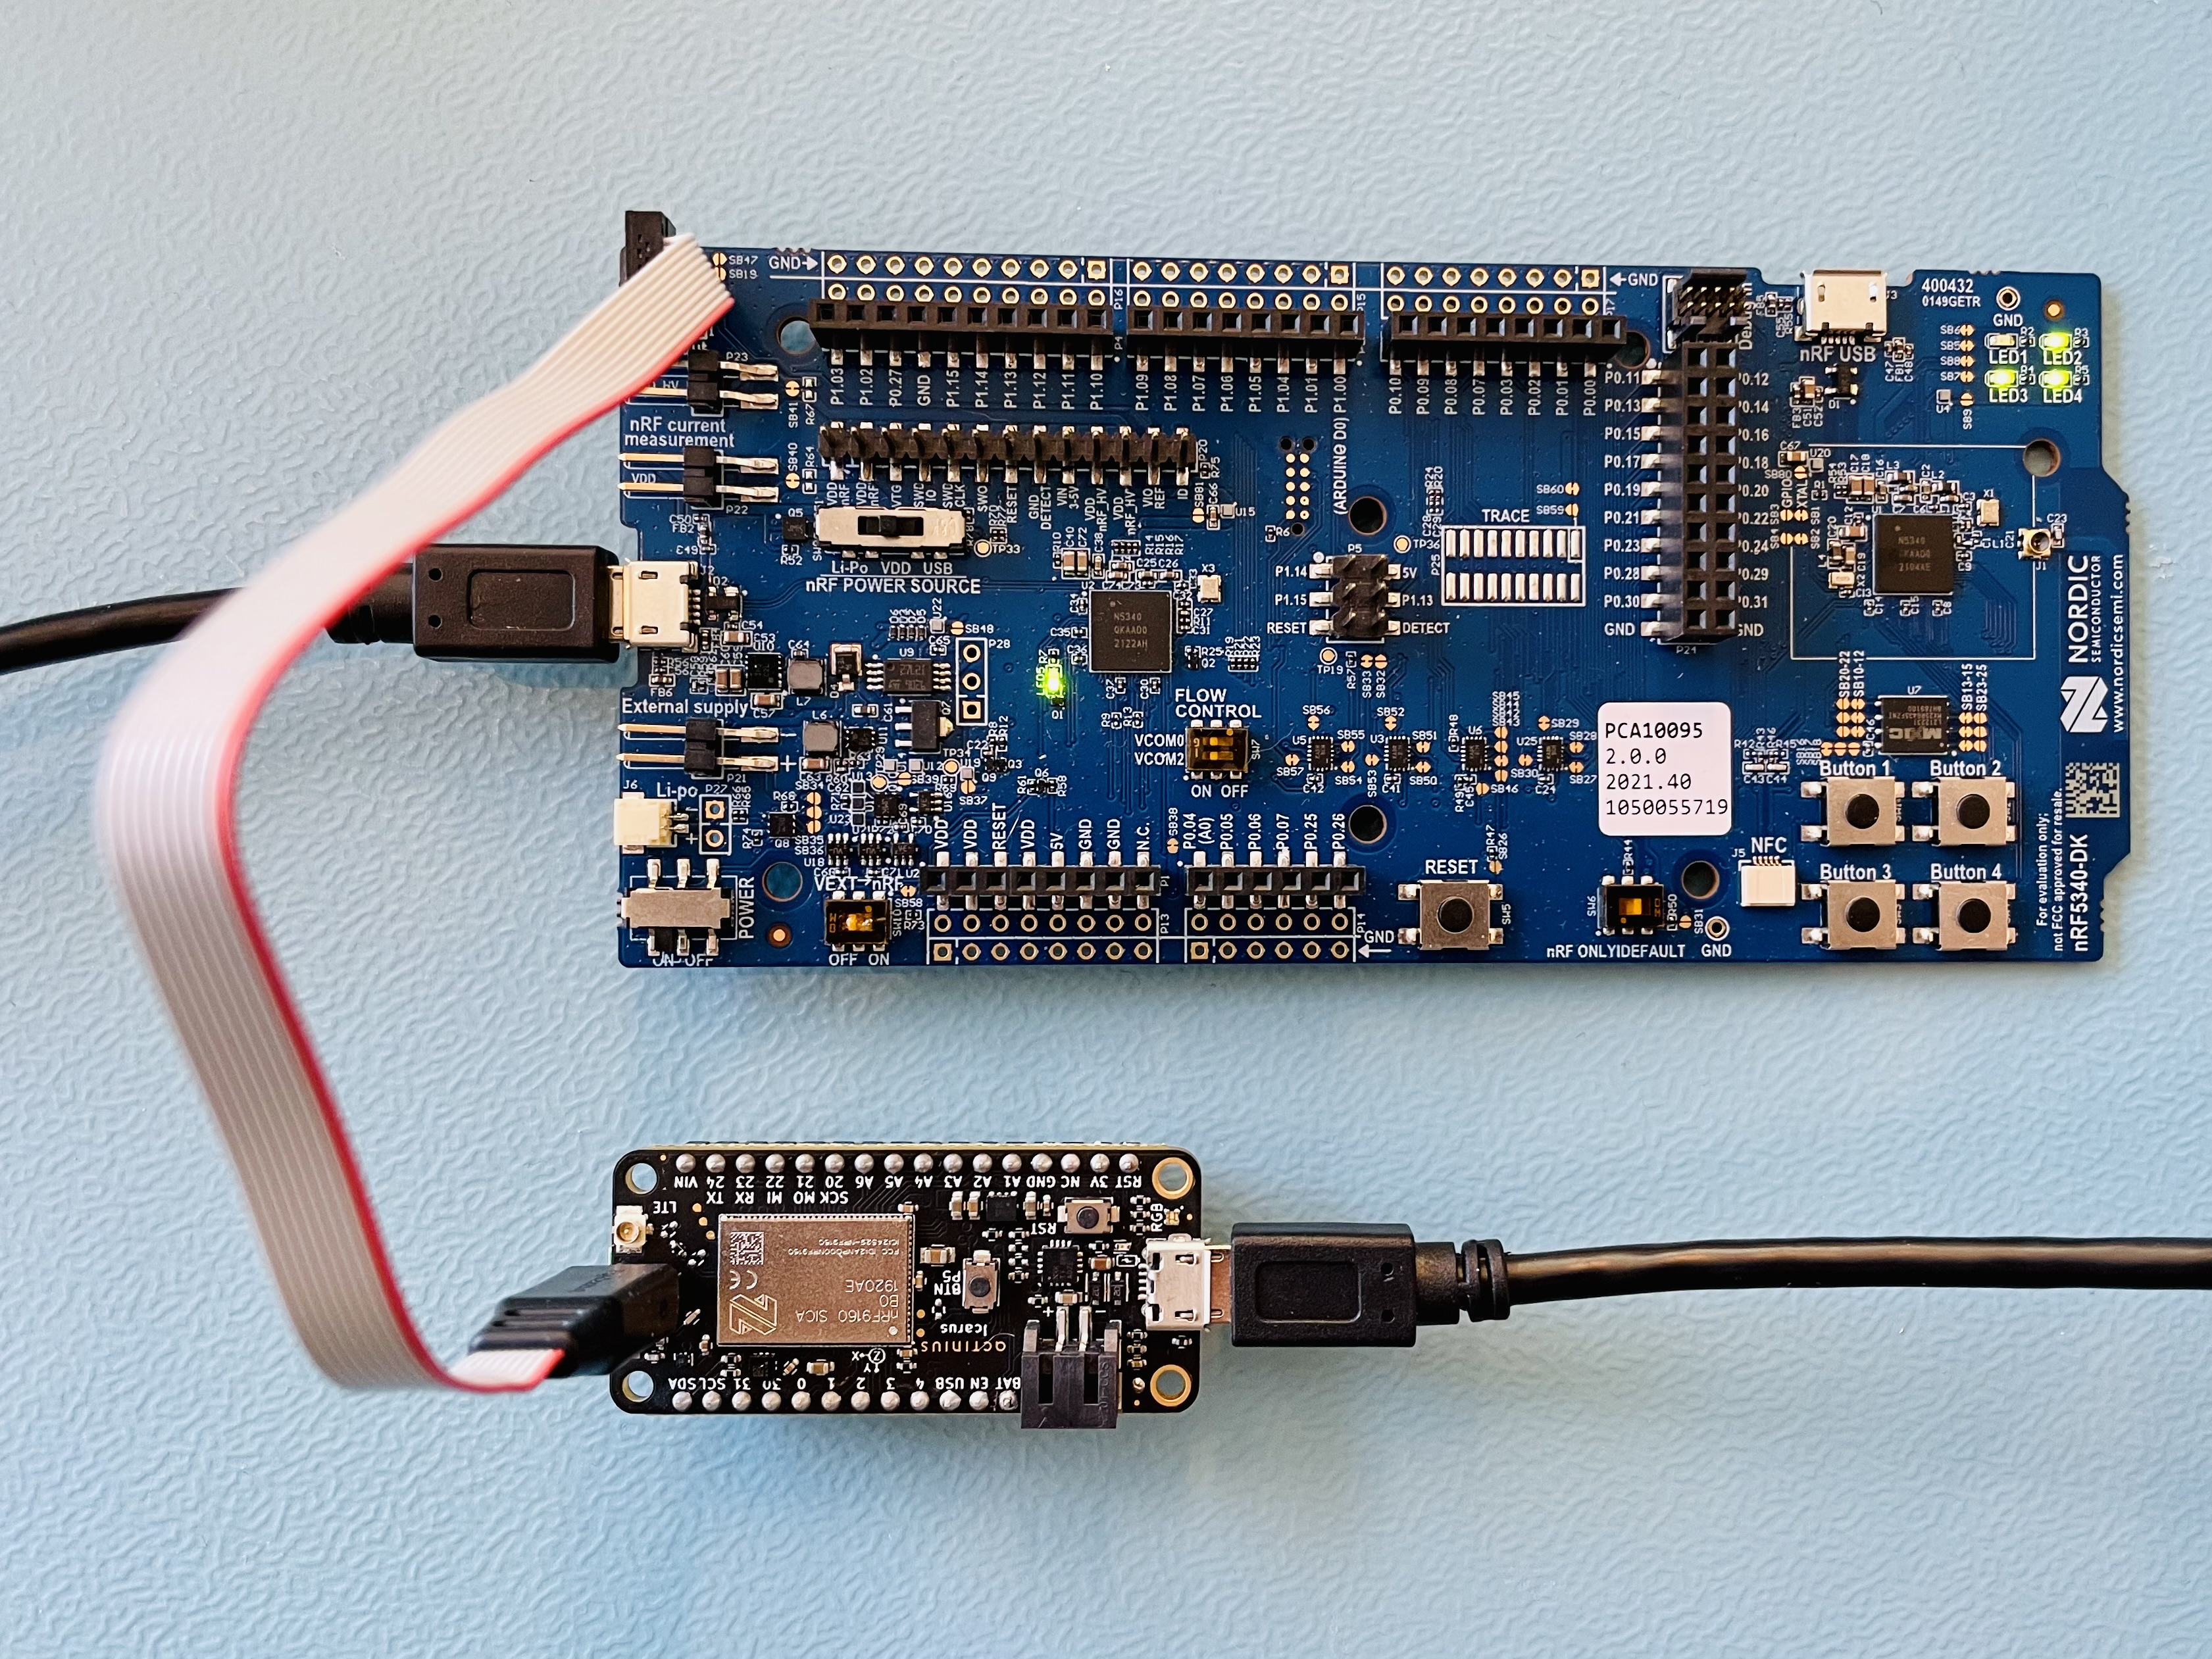 Programming setup with a nRF5340 development kit as a programmer. The boards are connected through the TagConnect cable and are powered through the microUSB ports.